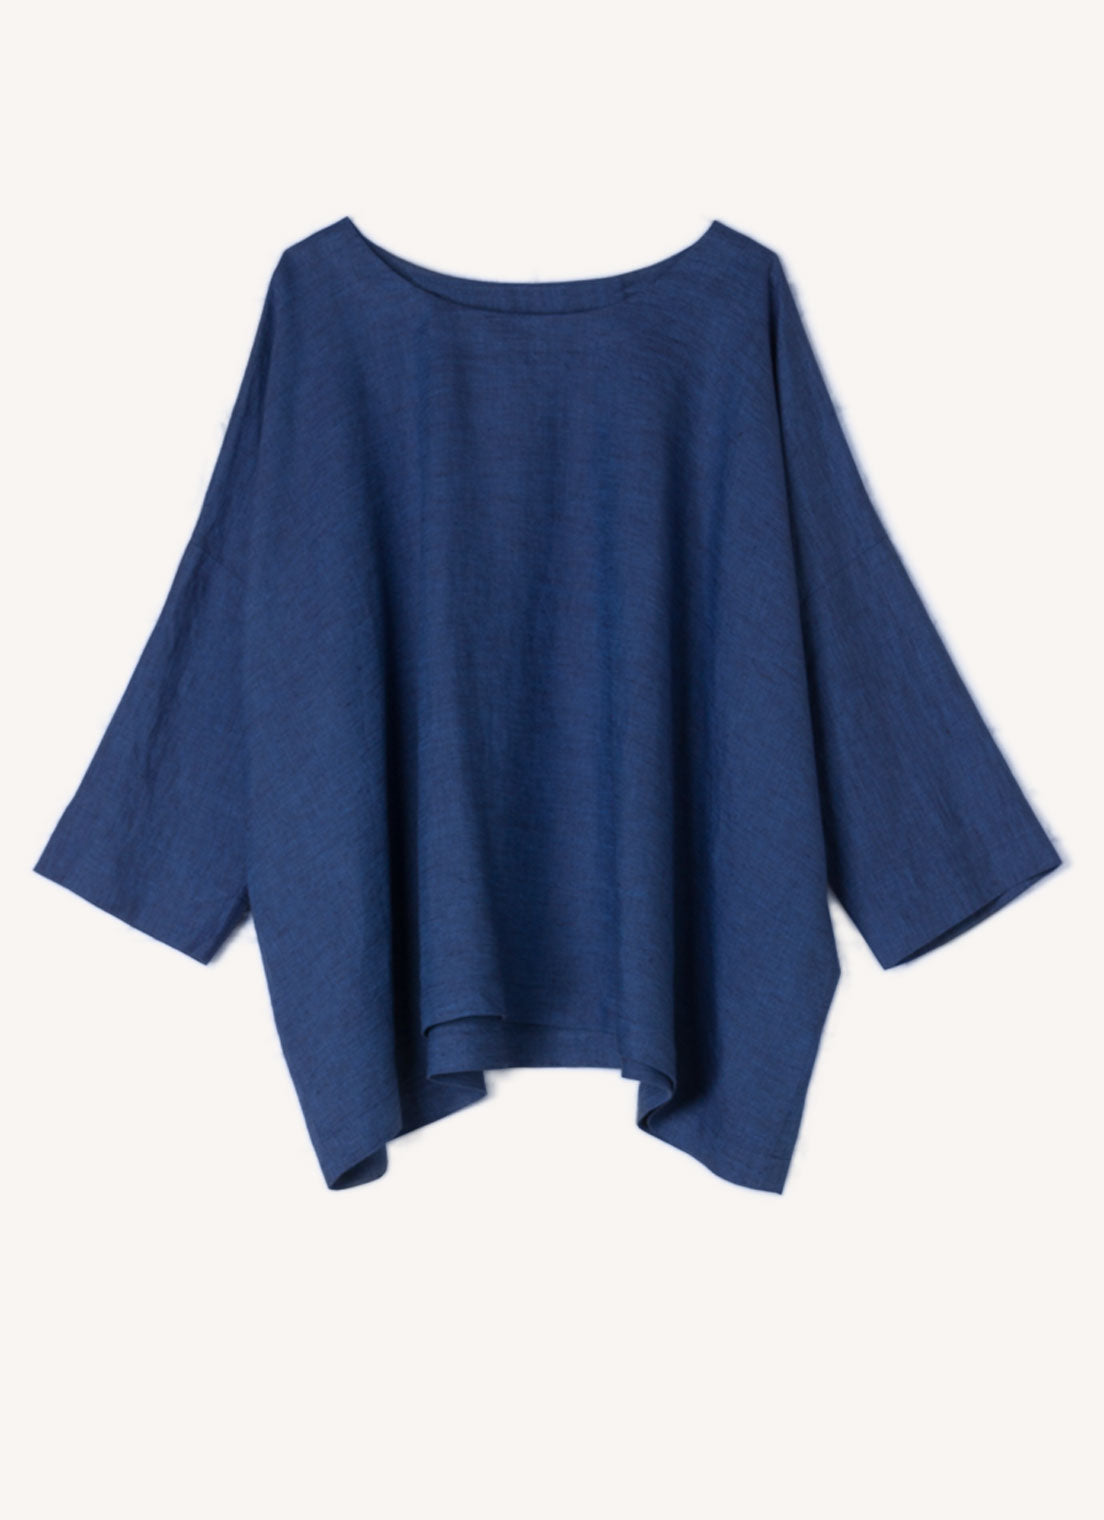 A blue, easy fit top with round neckline, long sleeves and embroidered detail at the back made from European pure linen